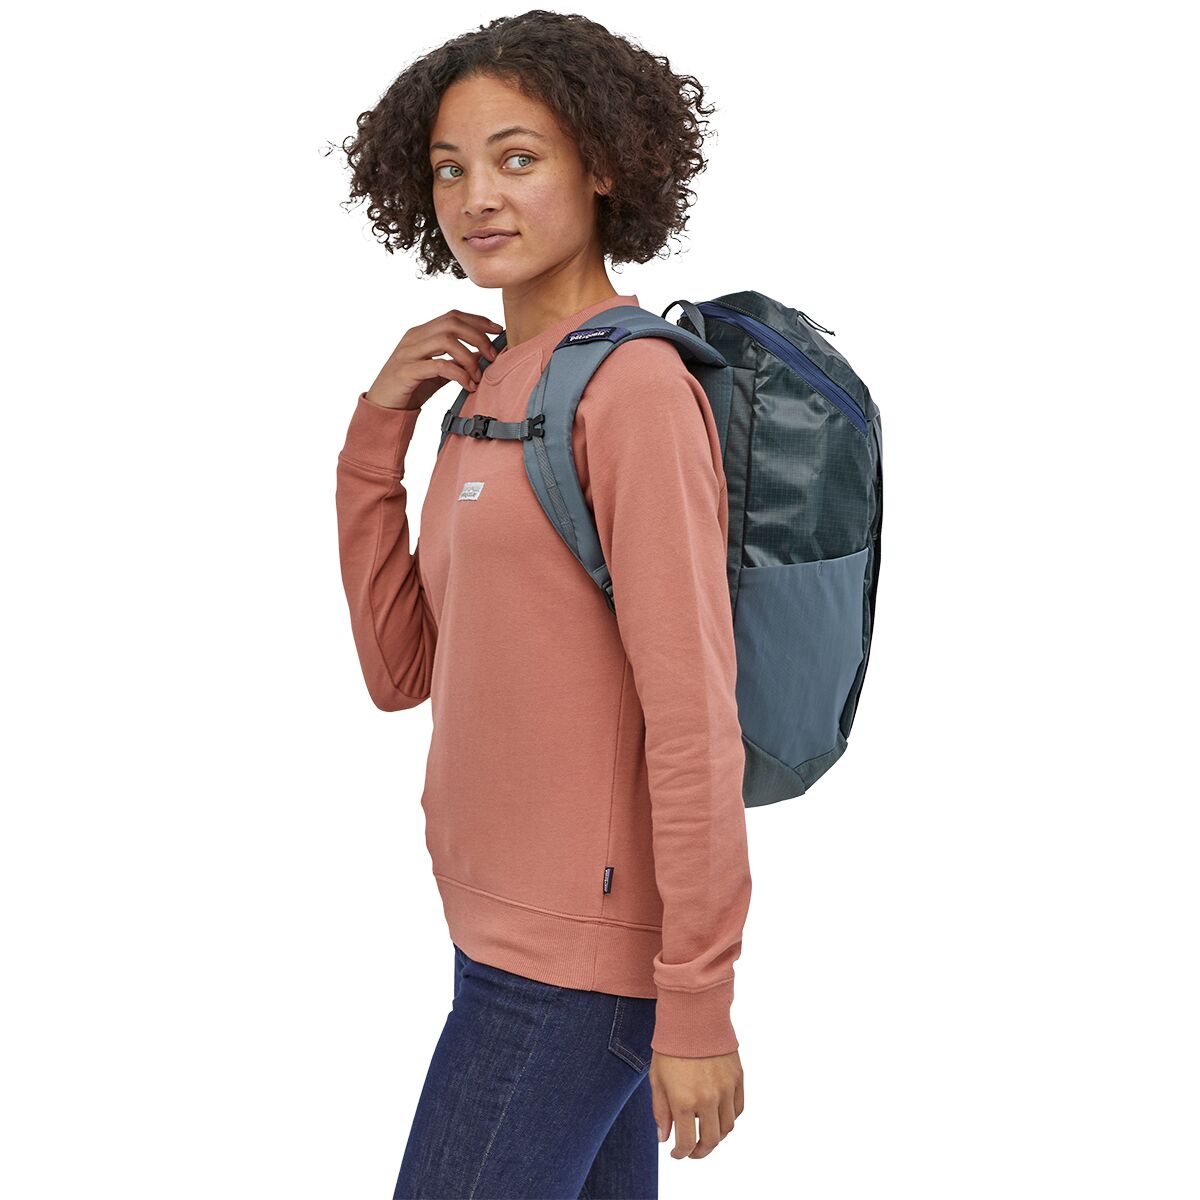 Patagonia Black Hole 23L Backpack - Women's - Accessories